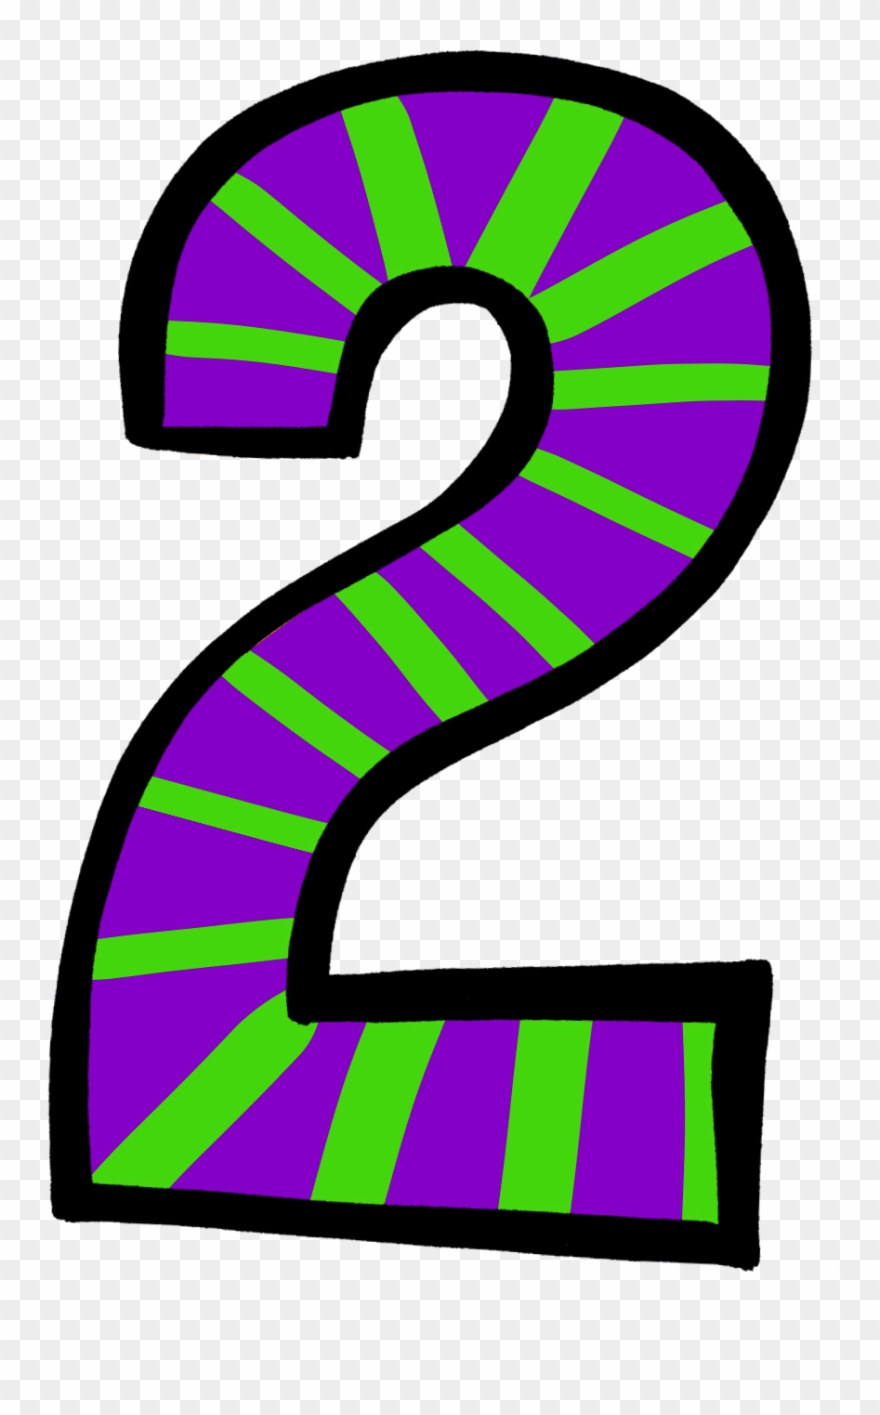 2 clipart number. Birthday purple and green